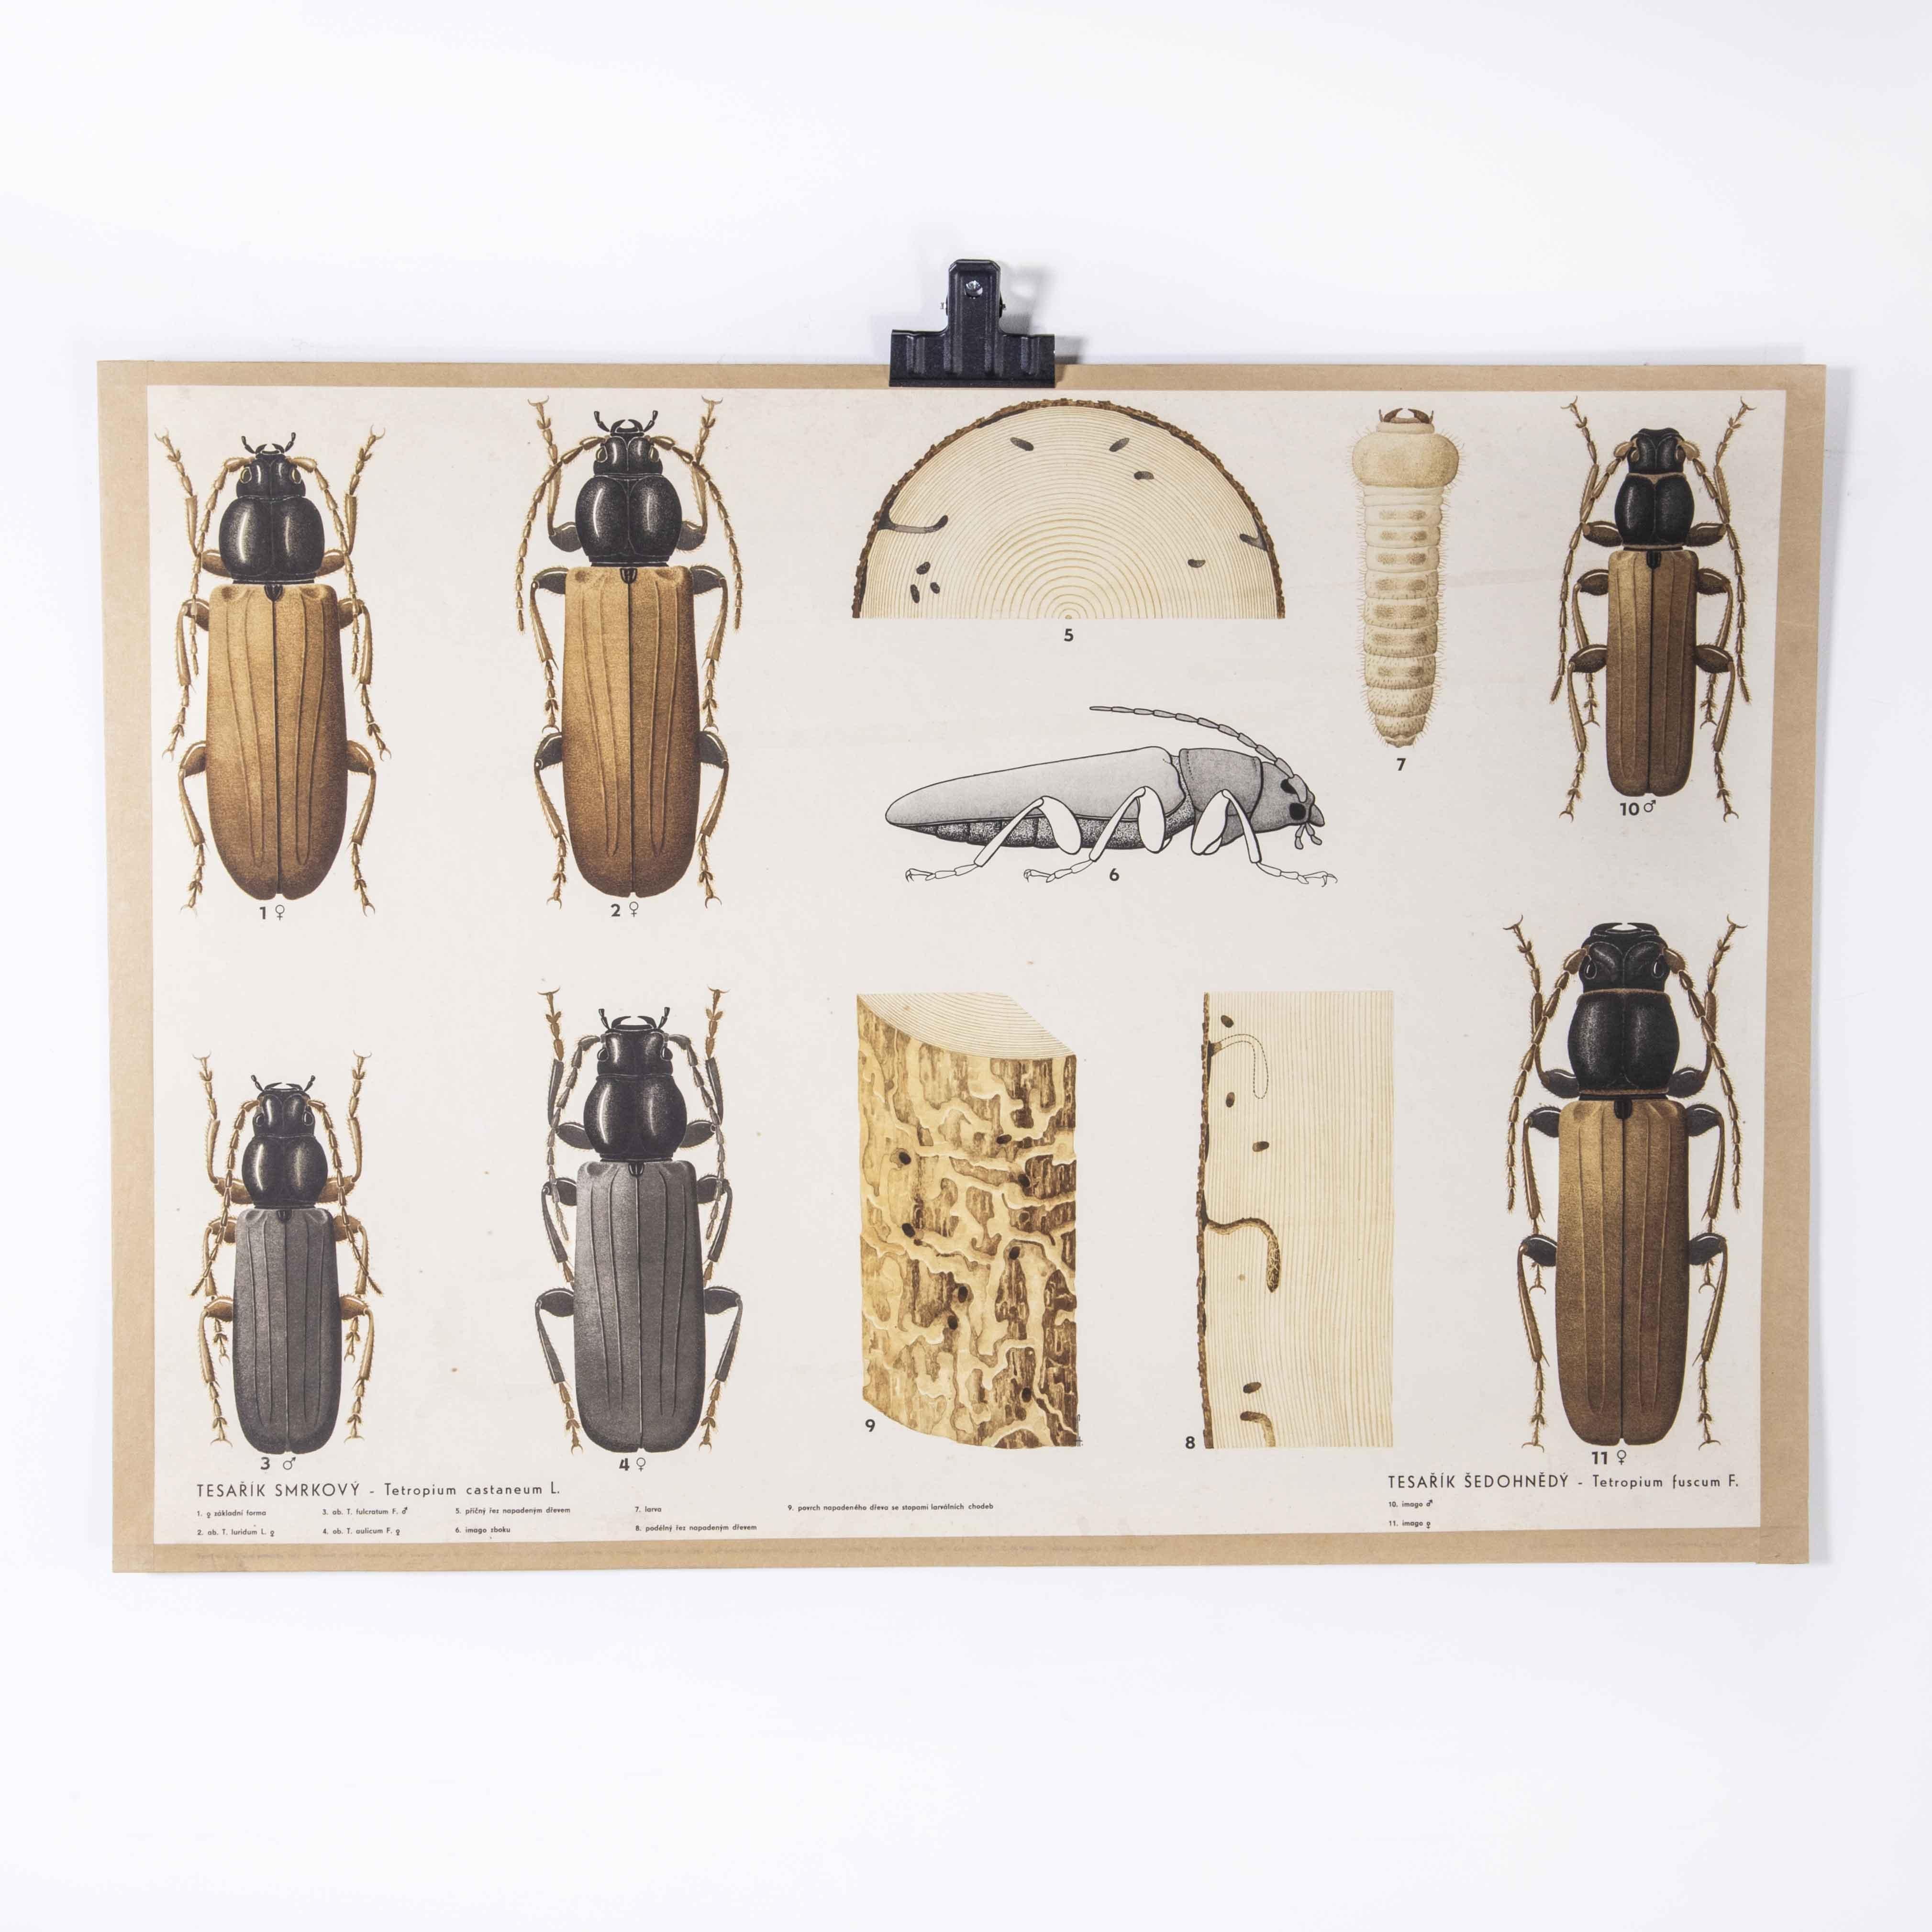 1960’s Beetle Educational poster
1960’s Beetle Educational poster. Early 20th century Czechoslovakian educational chart. A rare and vintage wall chart from the Czech Republic illustrating beetles. This heavyweight paper backed poster is in